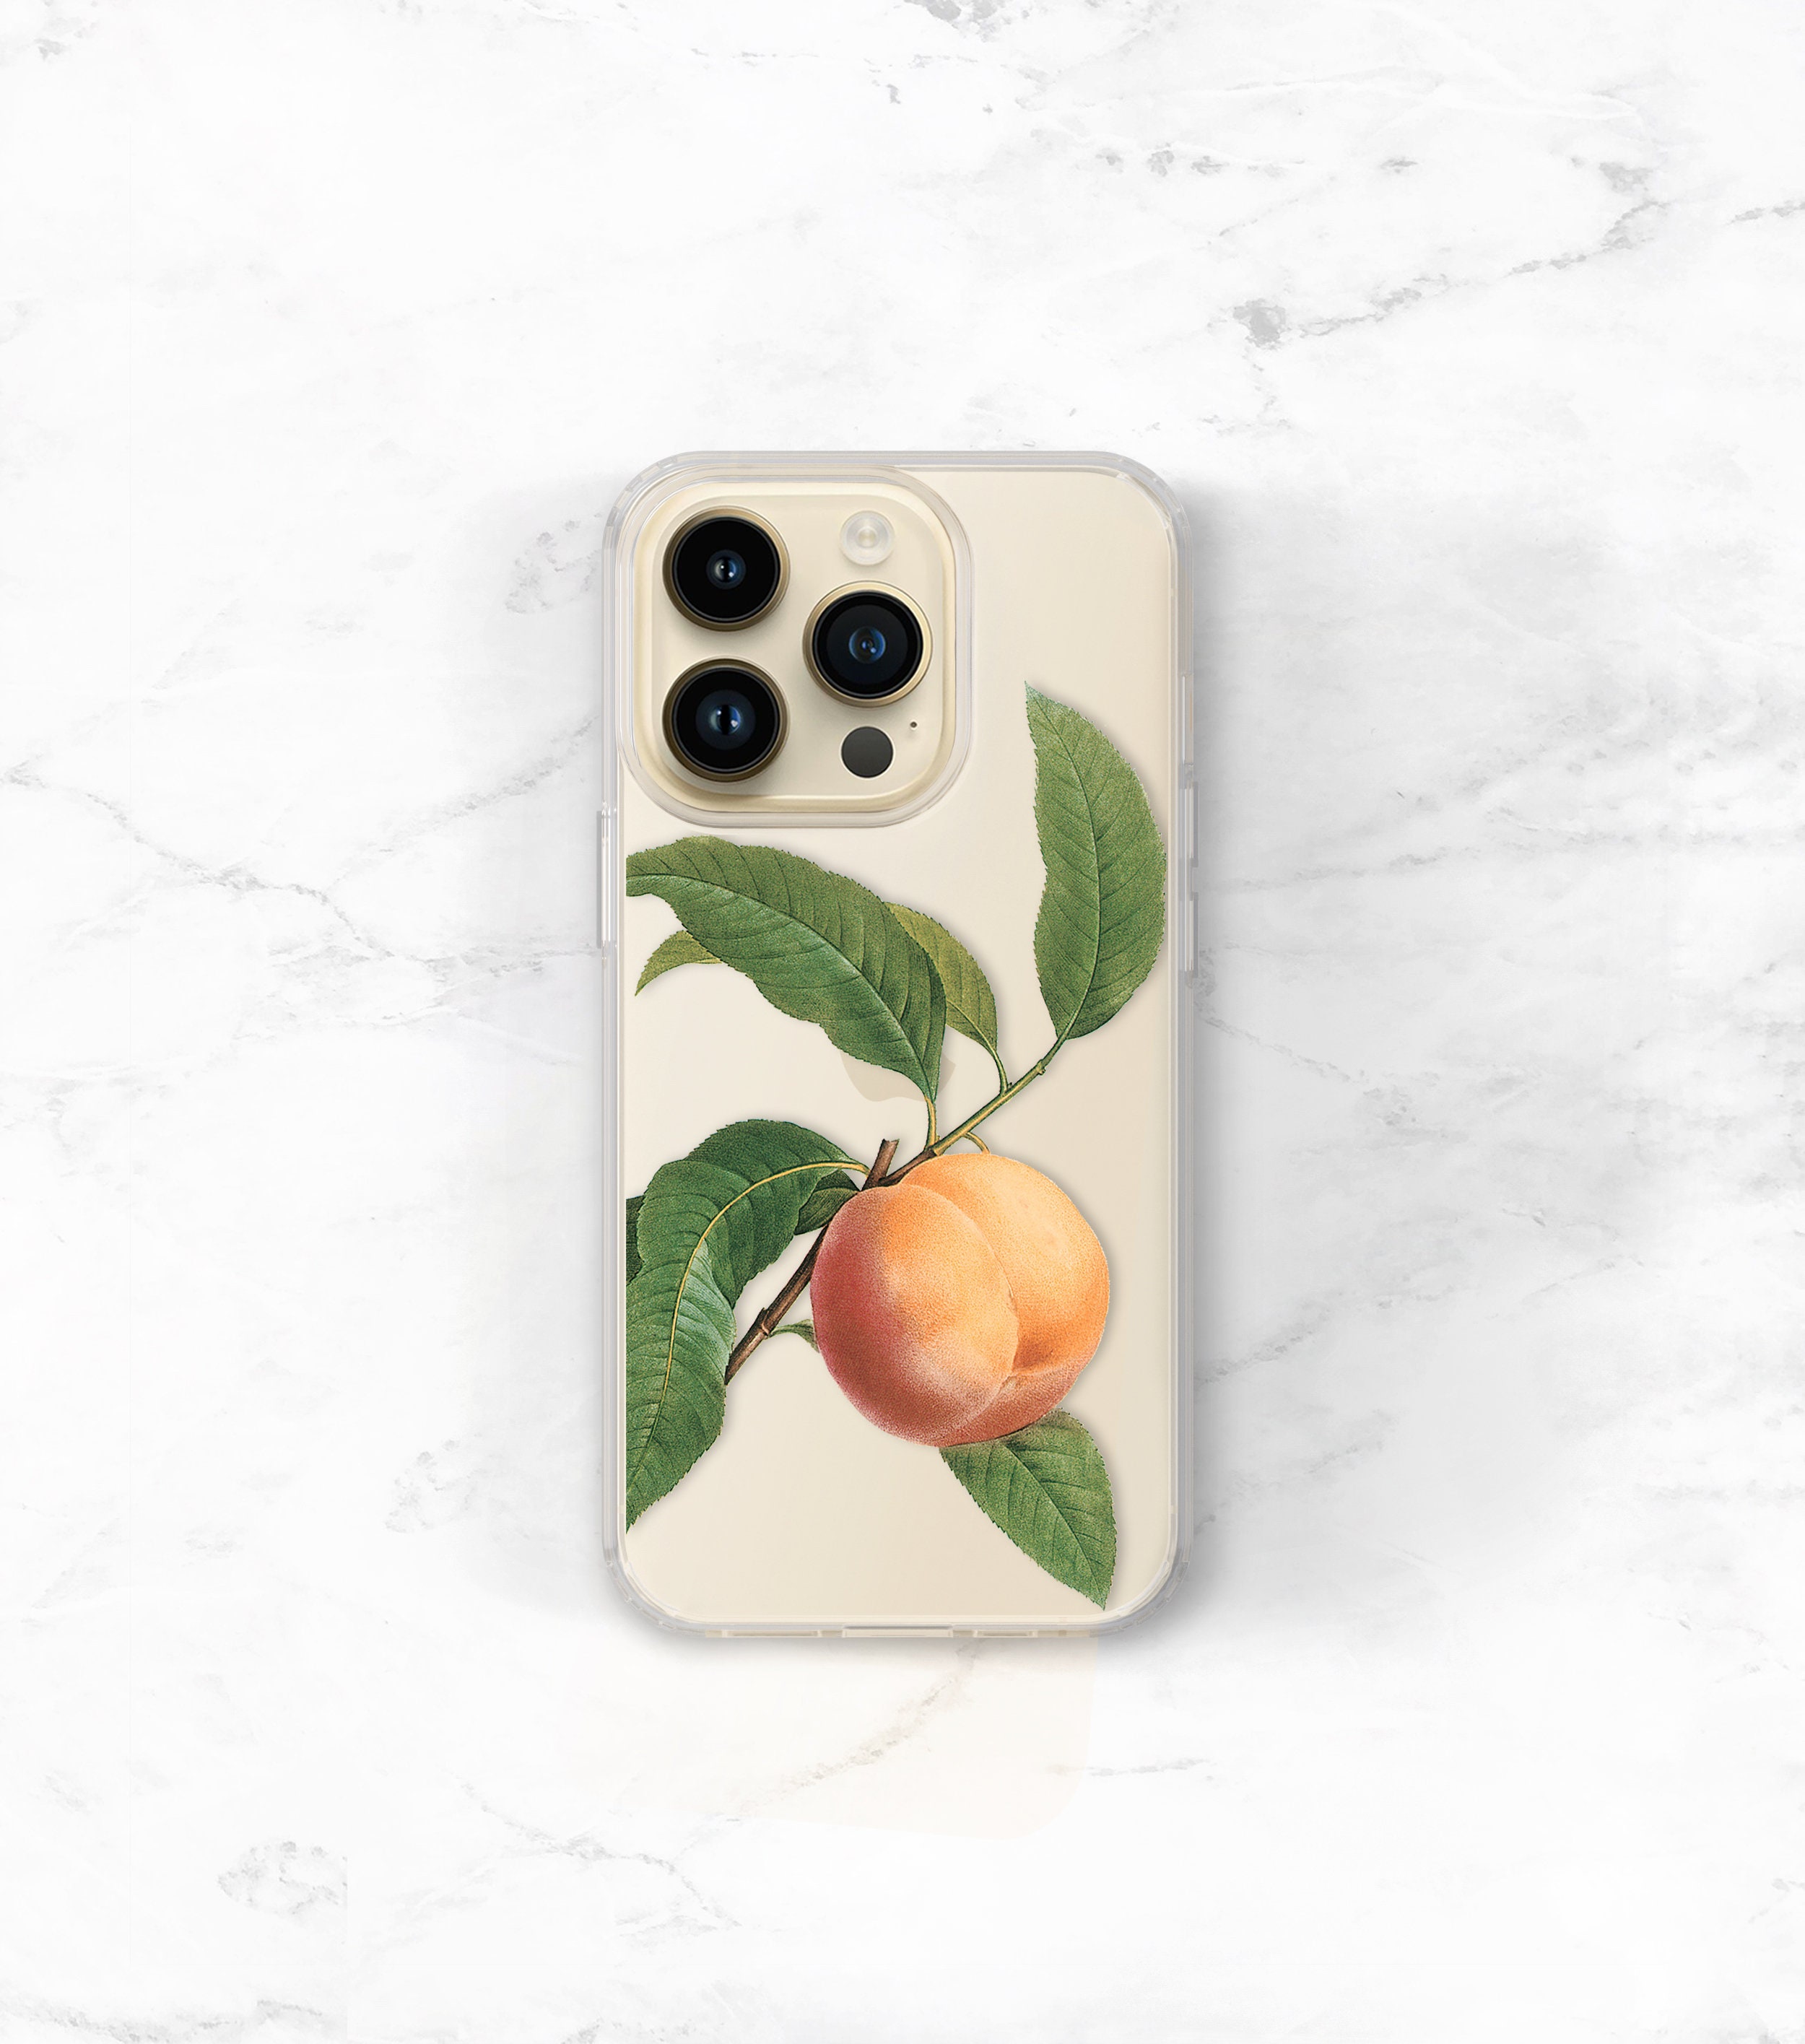 Peach and eggplant emoji  iPhone Case for Sale by PinkShinyArt